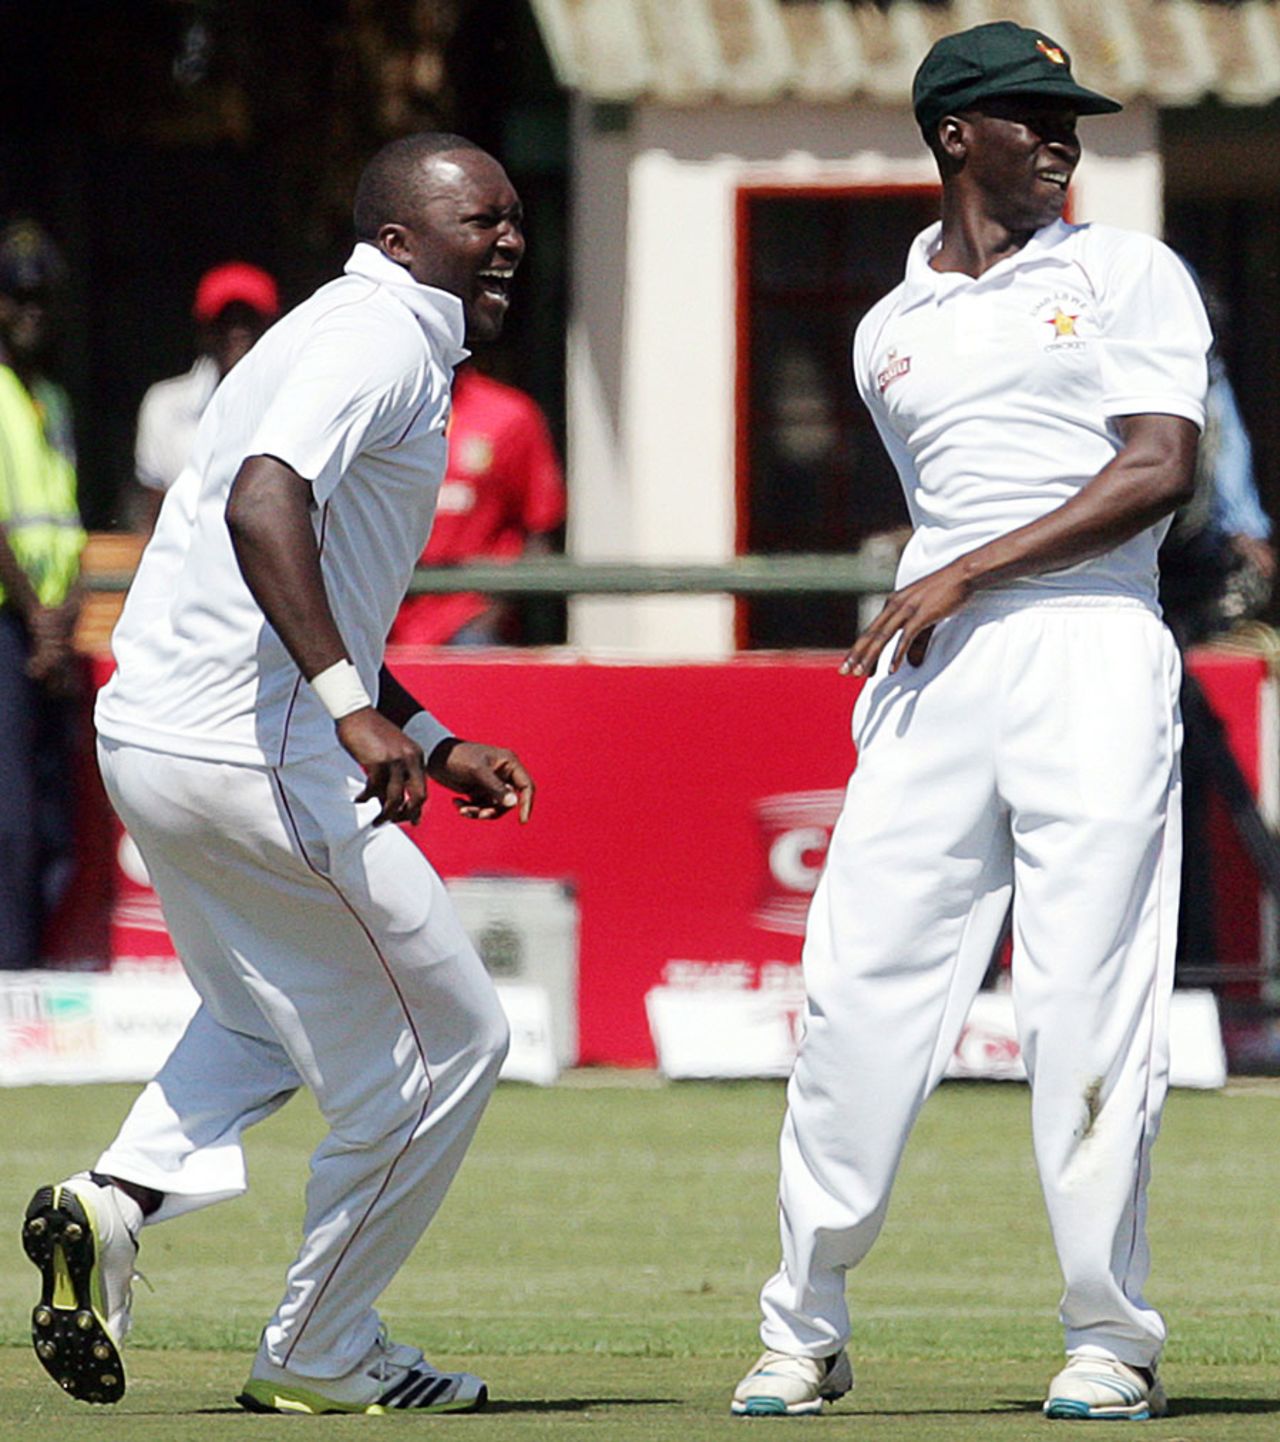 John Nyumbu is ecstatic after picking up his first Test wicket, Zimbabwe v South Africa, only Test, Harare, 2nd day, August 10, 2014